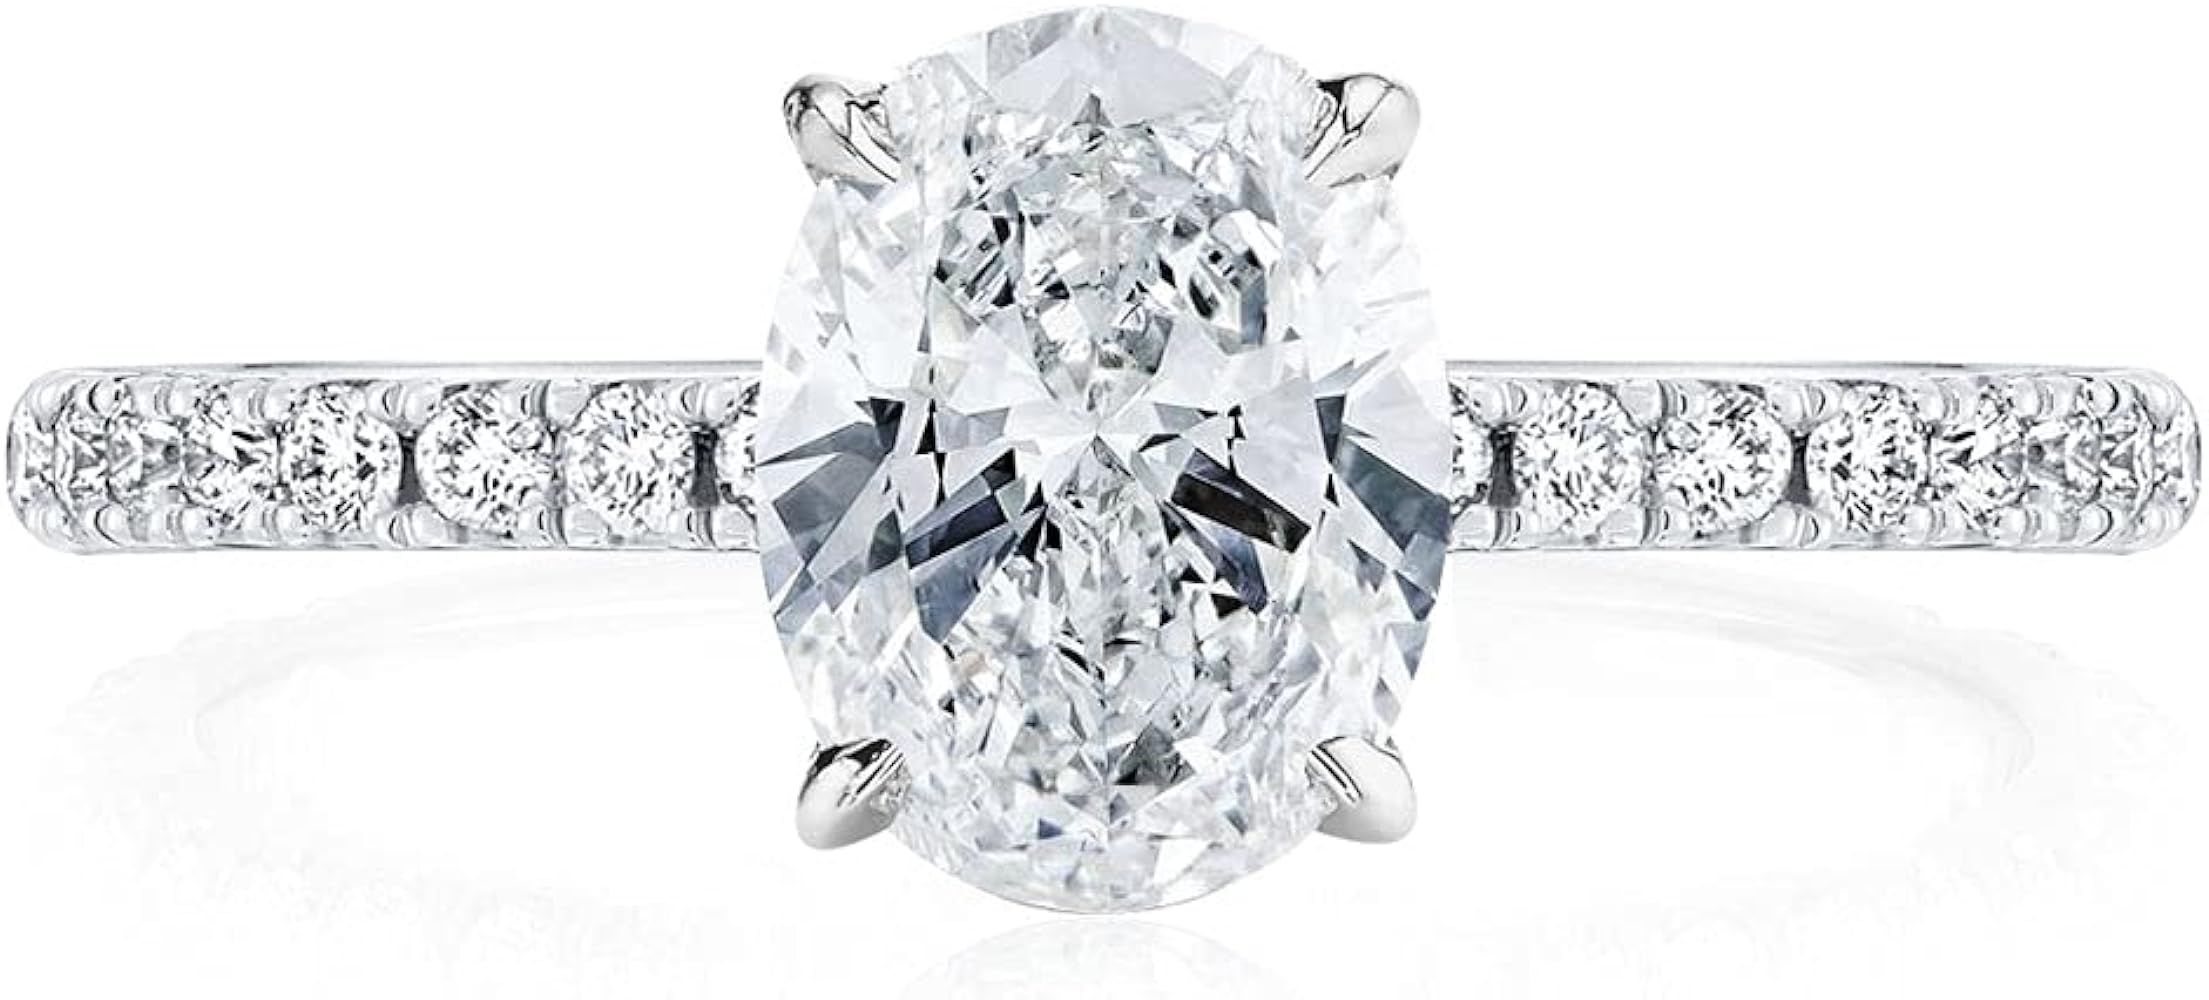 Bo.Dream 1.5ct/2ct Oval Cut Cubic Zirconia CZ Engagement Ring Rhodium Plated Sterling Silver | Amazon (US)